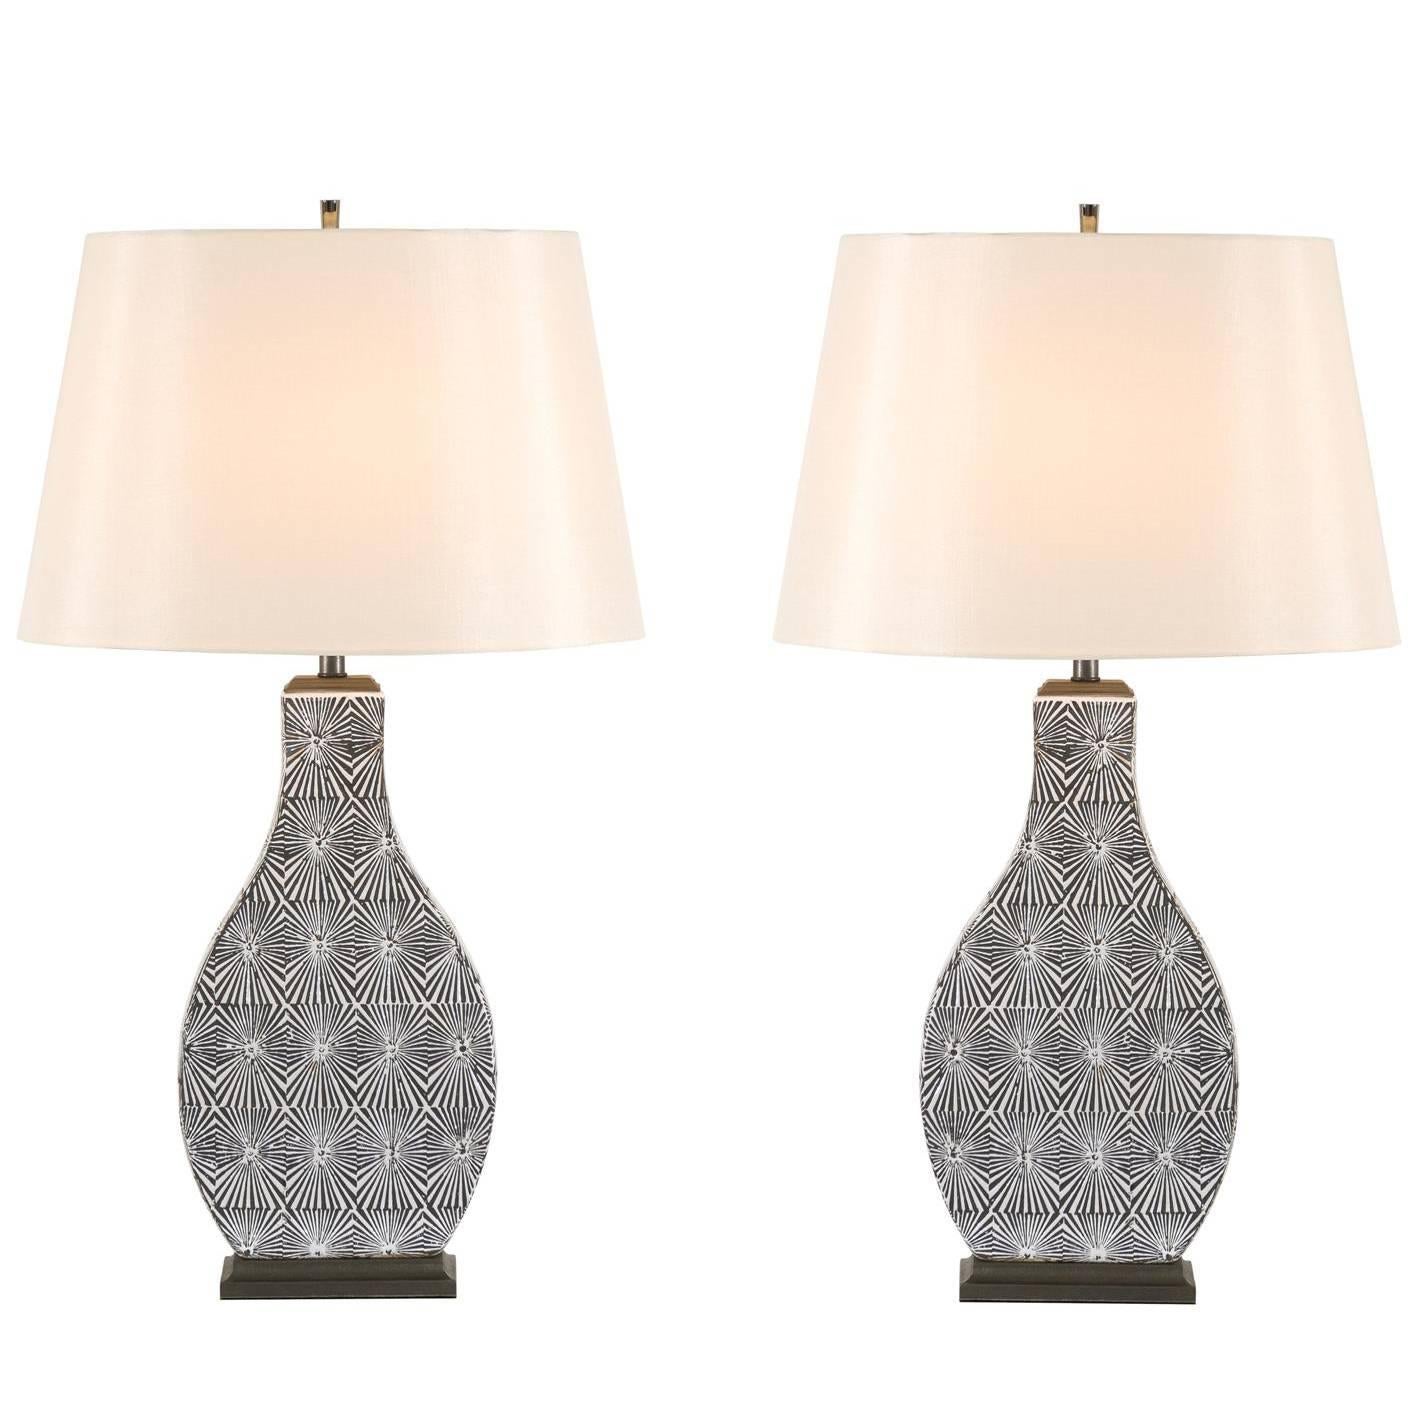 Restored Pair of Modern Ceramic Lamps in Charcoal and Cream For Sale